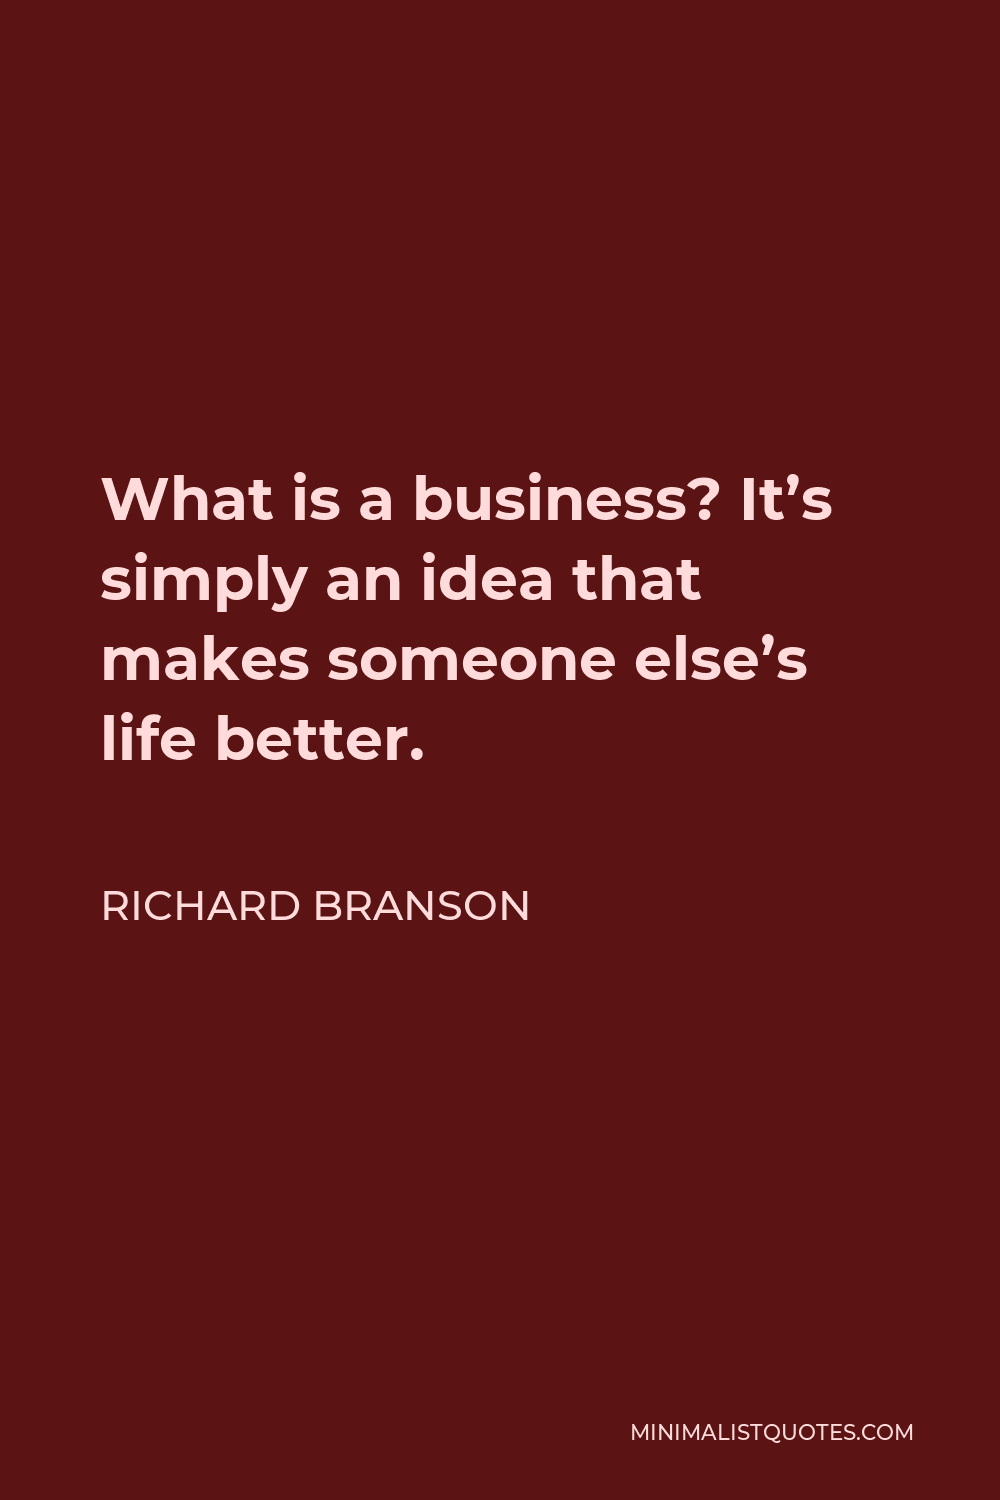 Richard Branson Quote - What is a business? It’s simply an idea that makes someone else’s life better.